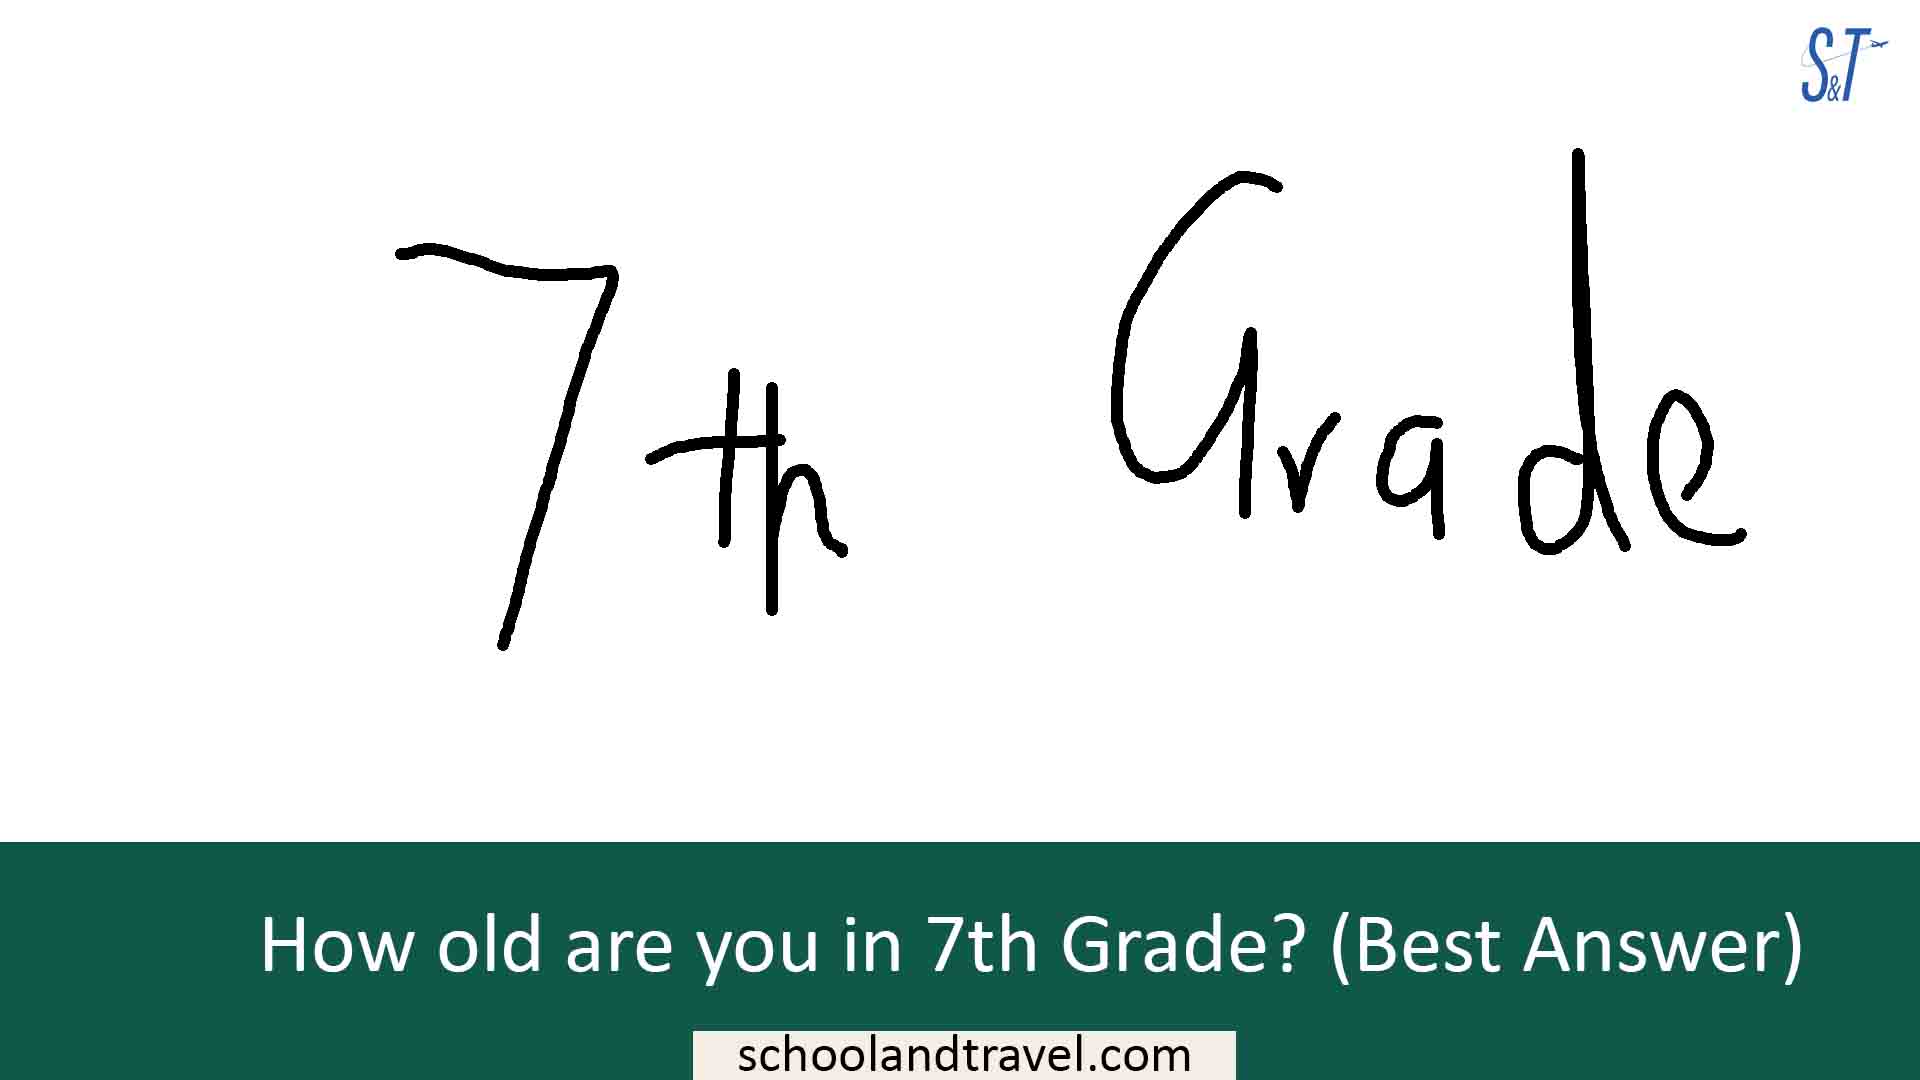 How old are you in 7th Grade? (Best Answer)